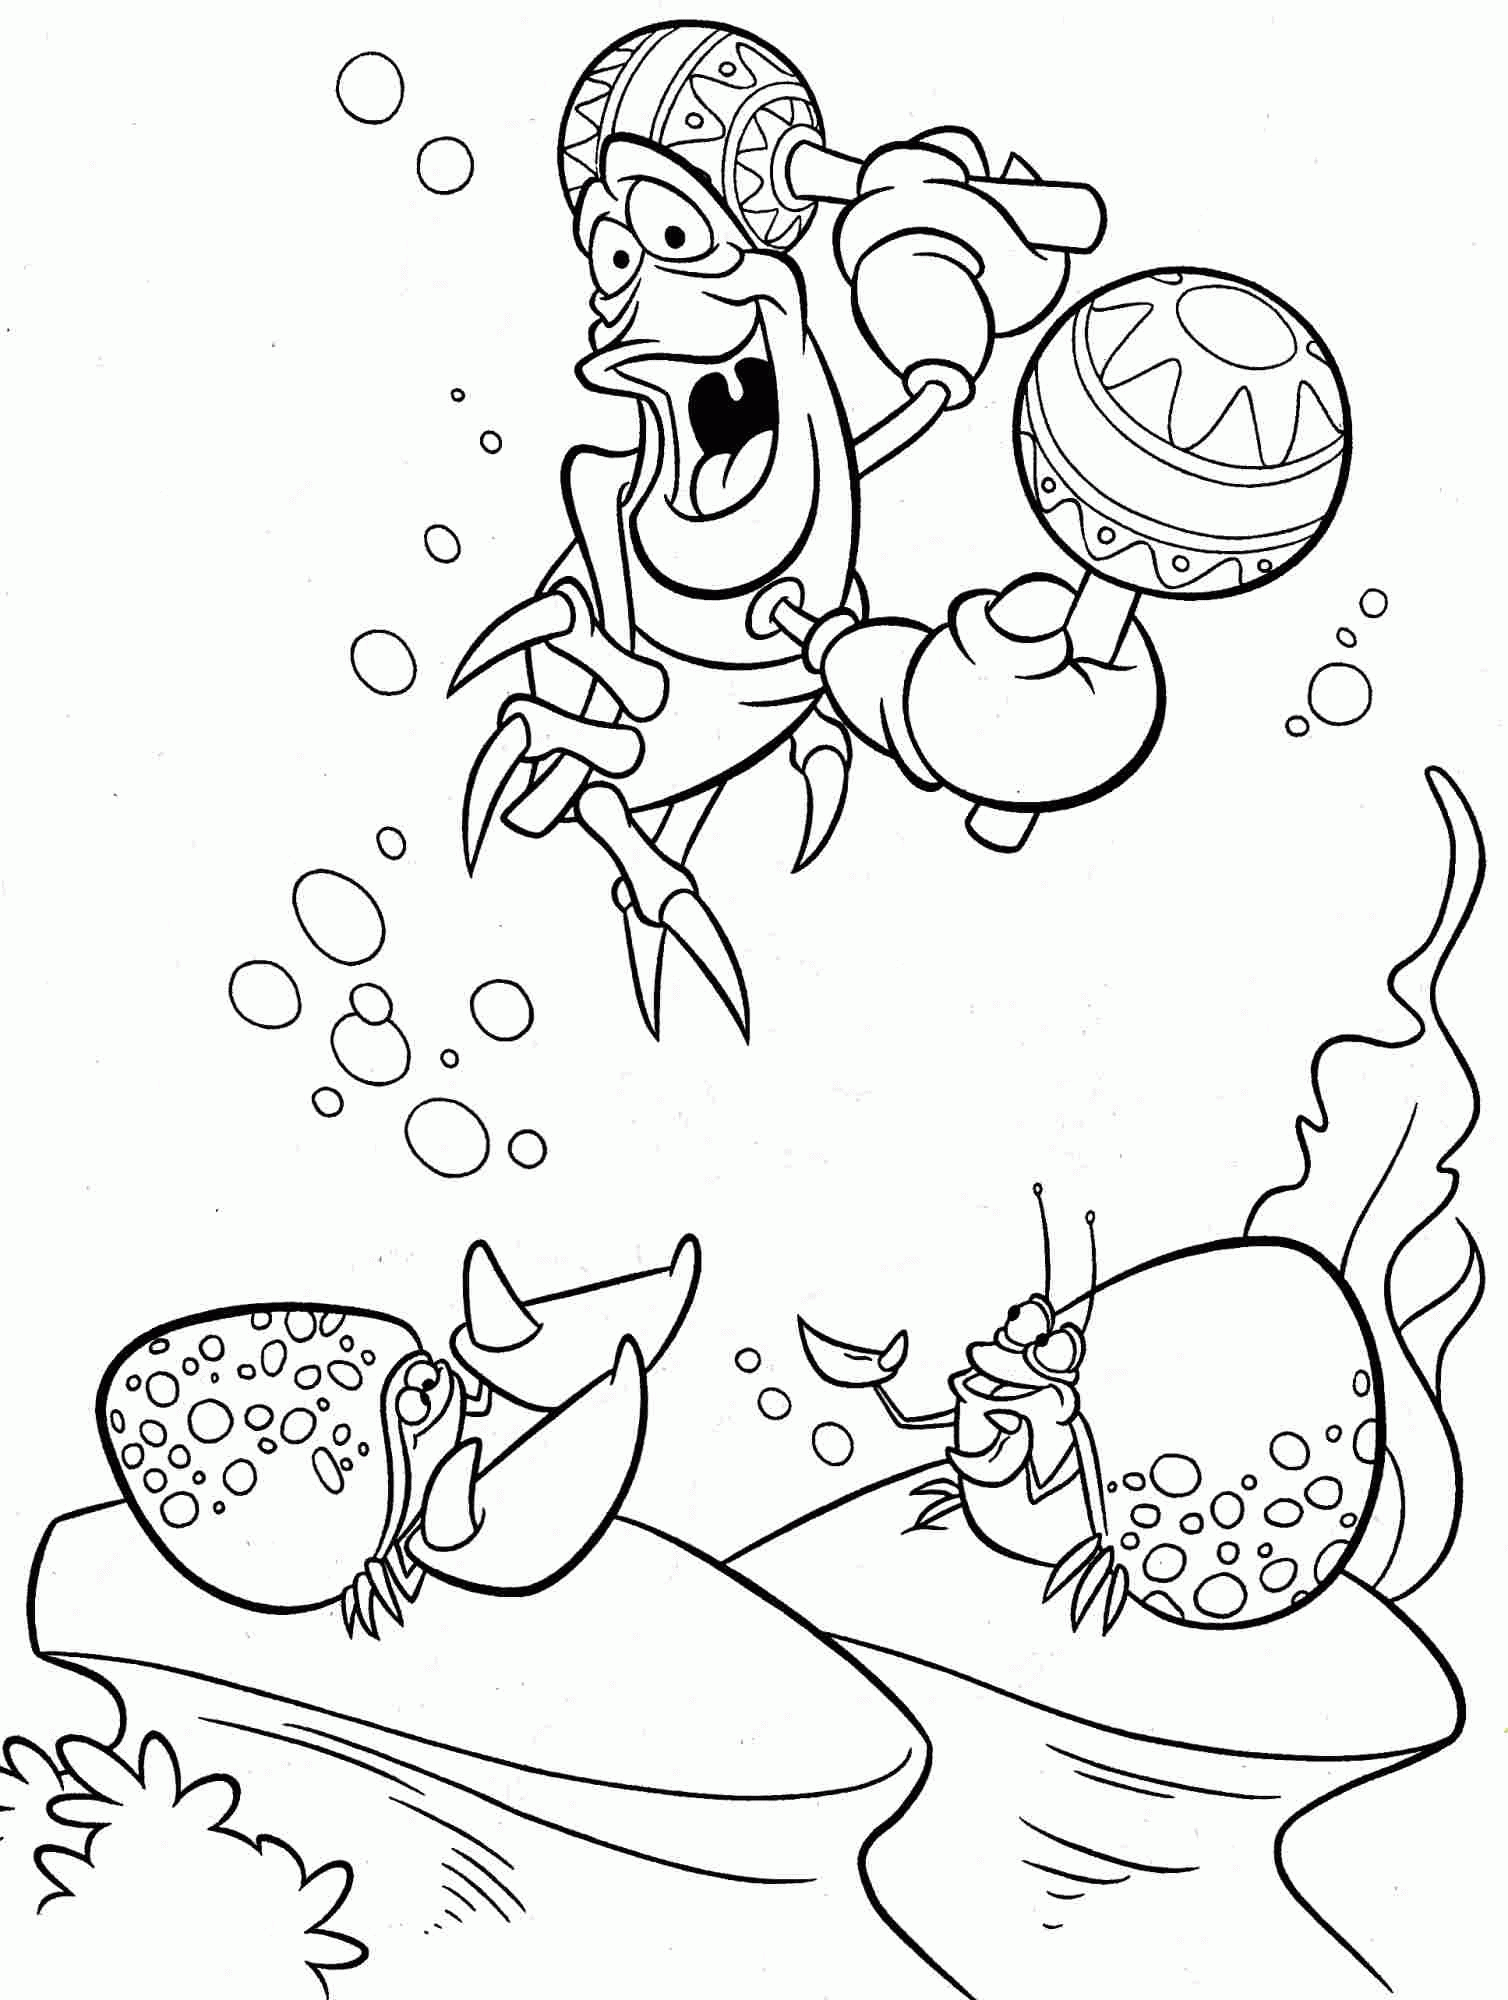 Free Ursula Little Mermaid Coloring Pages, Download Free Ursula Little